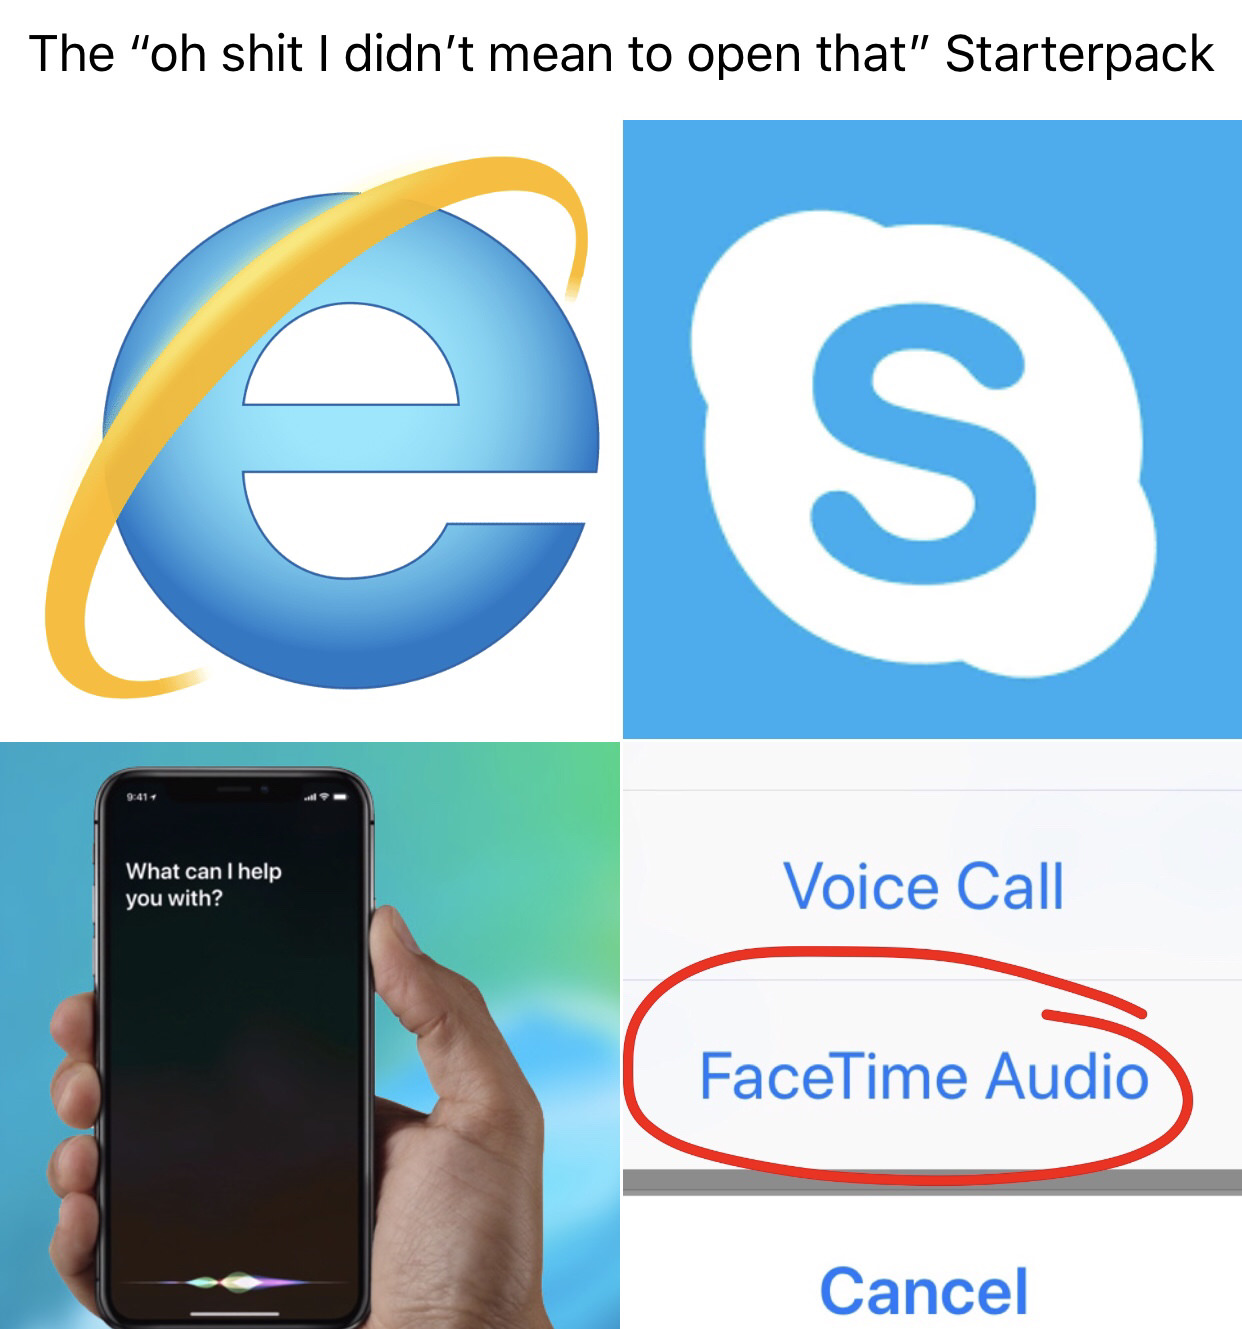 didn t mean to open that startpack - The "oh shit I didn't mean to open that" Starterpack What can I help you with? Voice Call FaceTime Audio Cancel